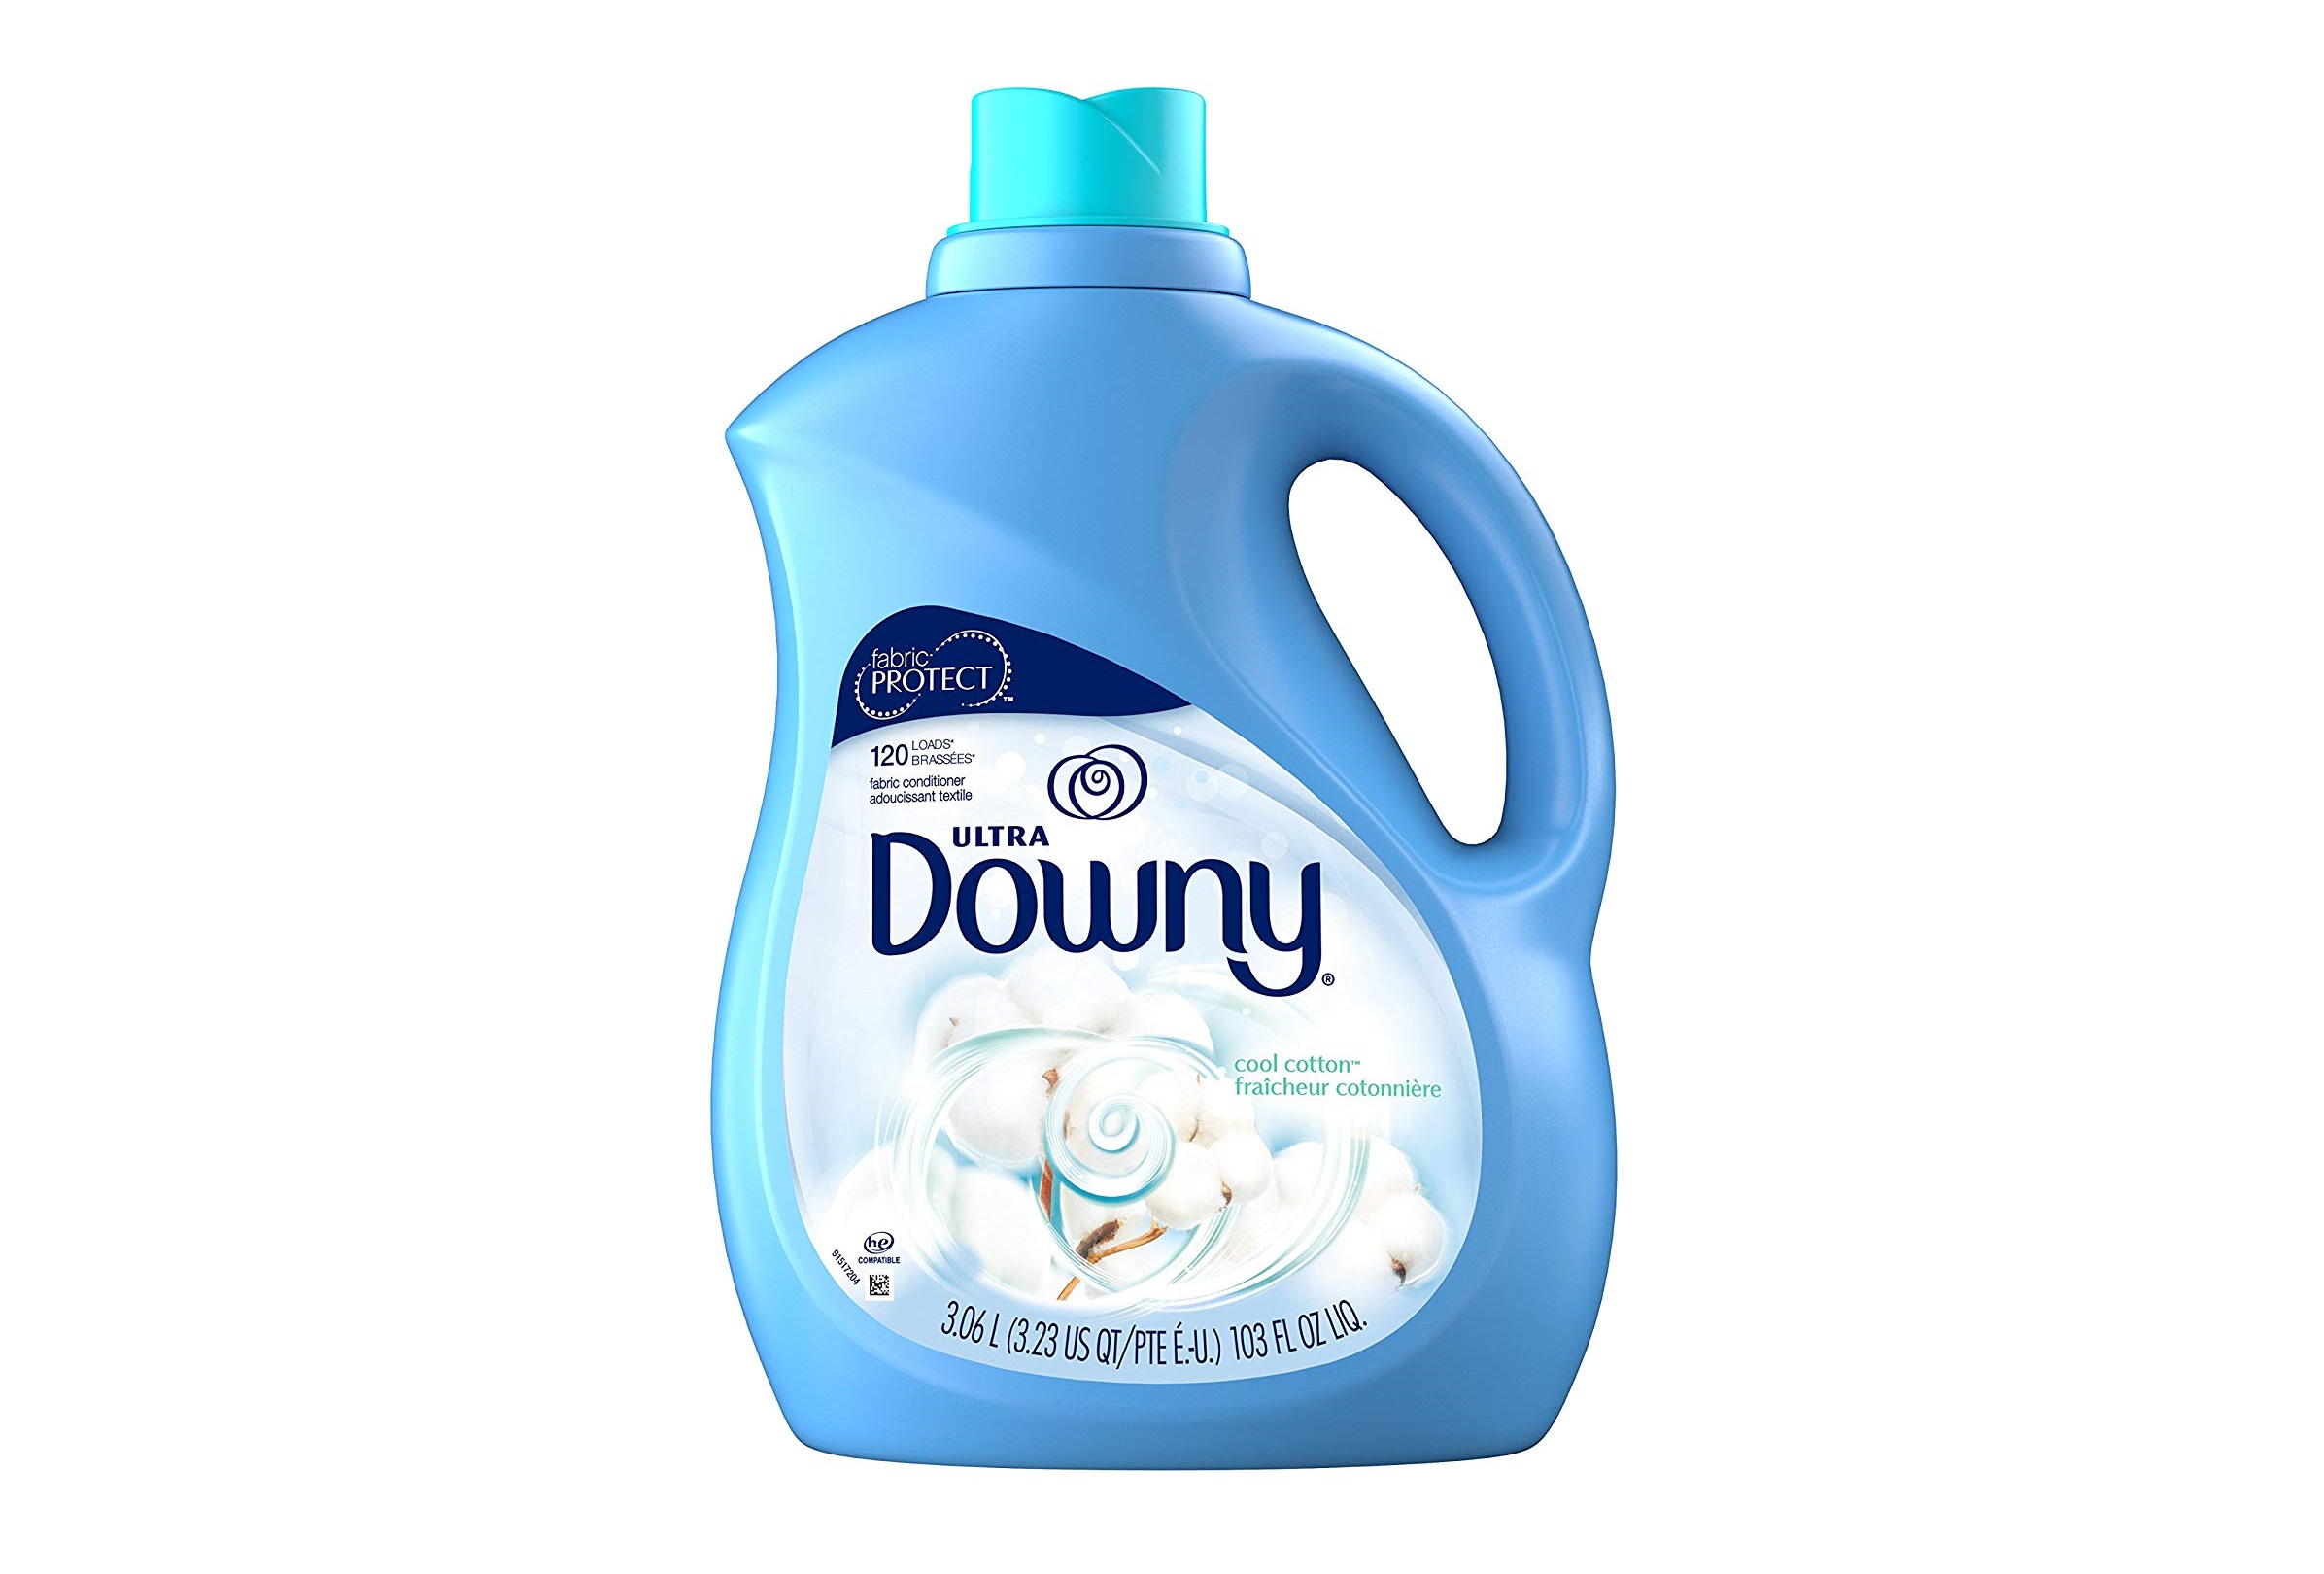 a container of Downy Ultra fabric softener